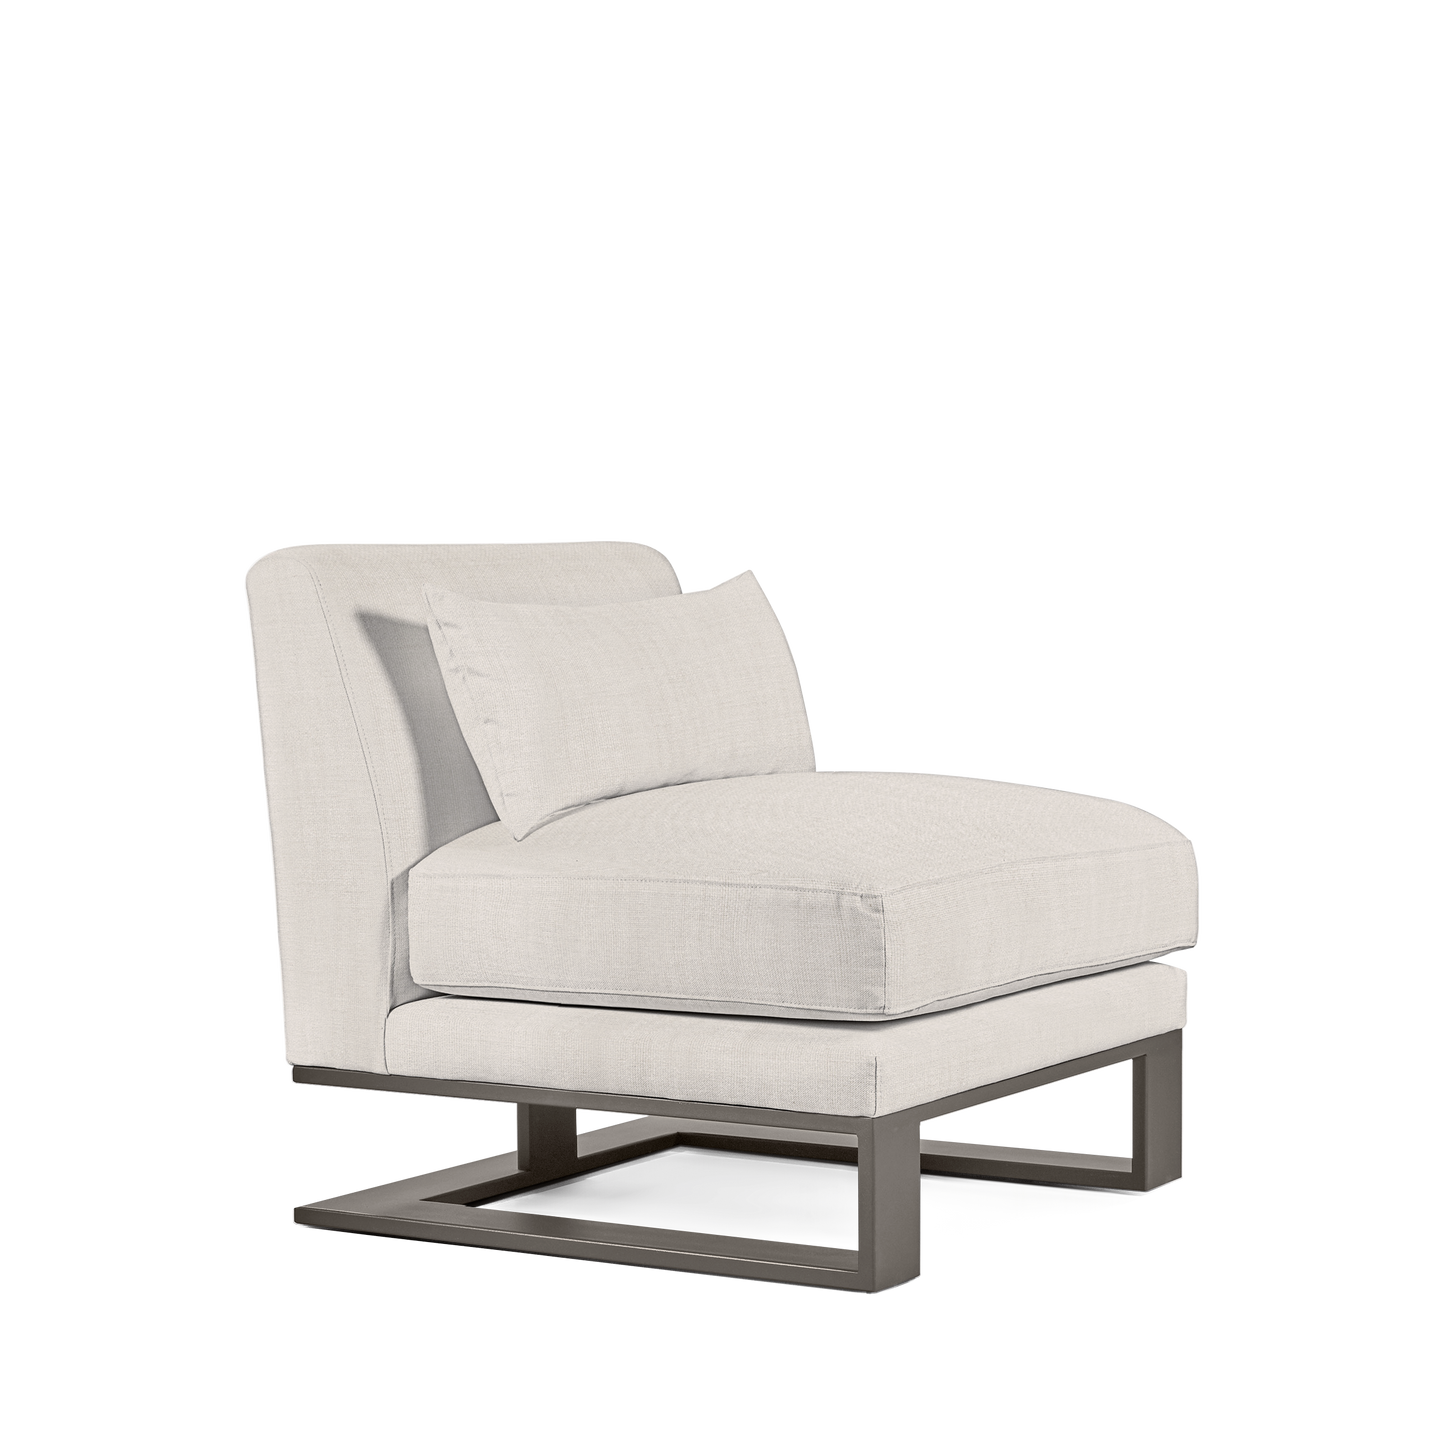 Alpes armchair with light grey textile and champagne colored wood legs